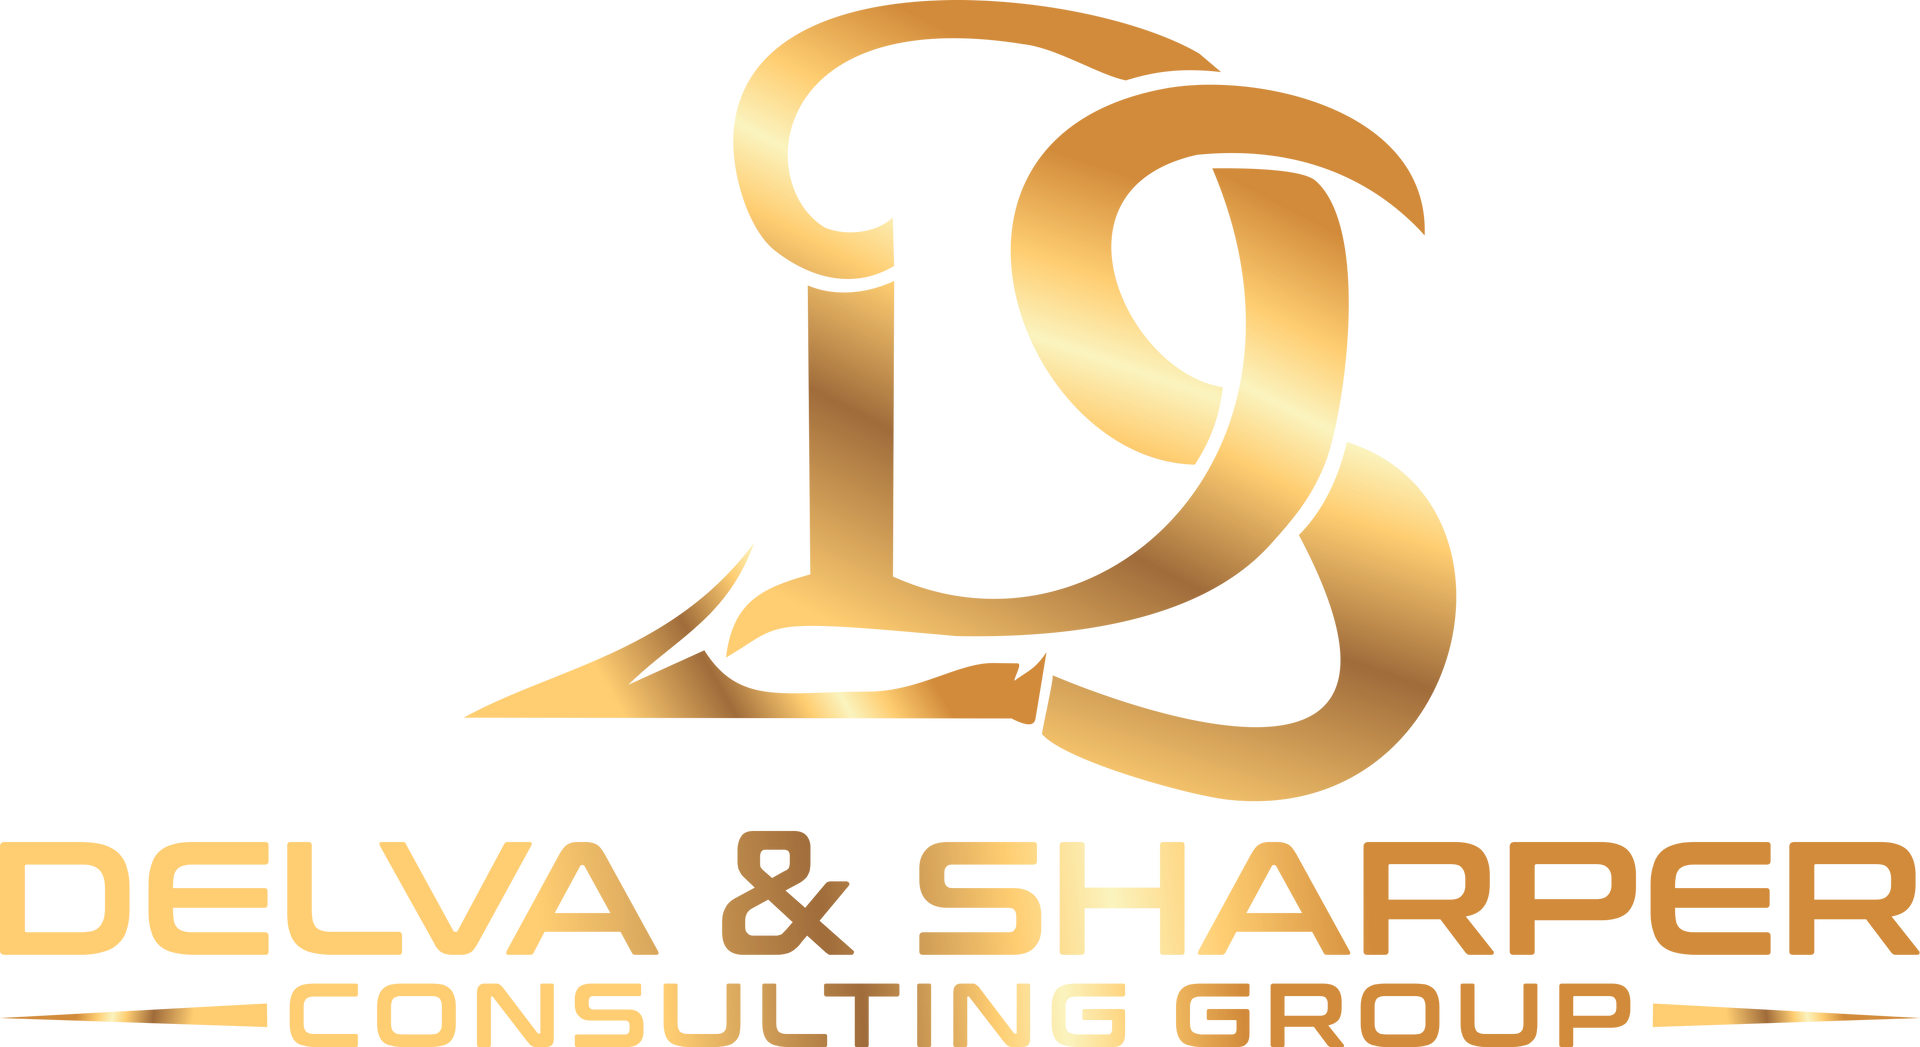 a gold logo for delva & sharper consulting group